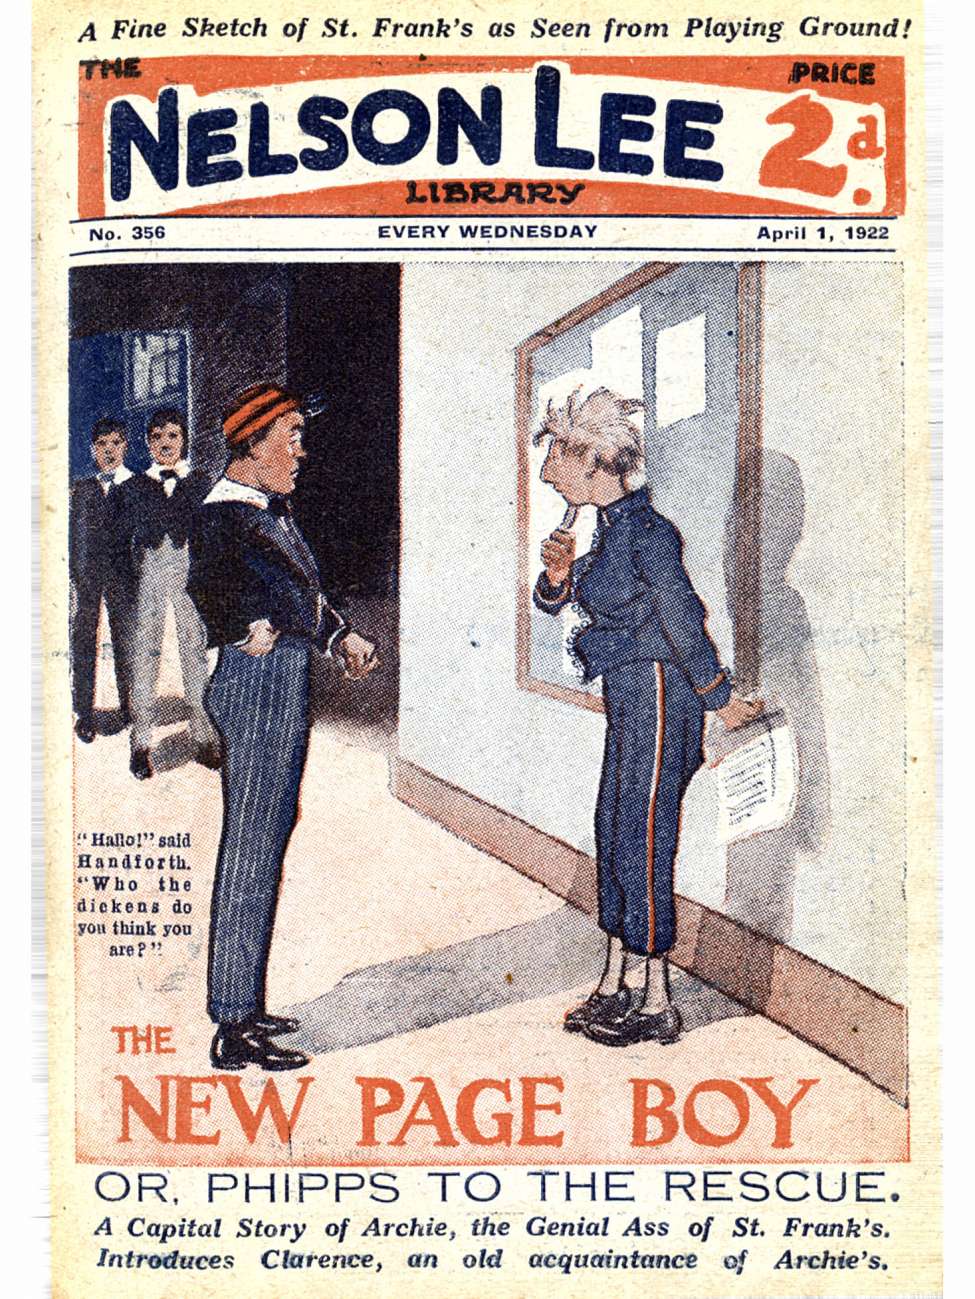 Comic Book Cover For Nelson Lee Library s1 356 - The New Page Boy